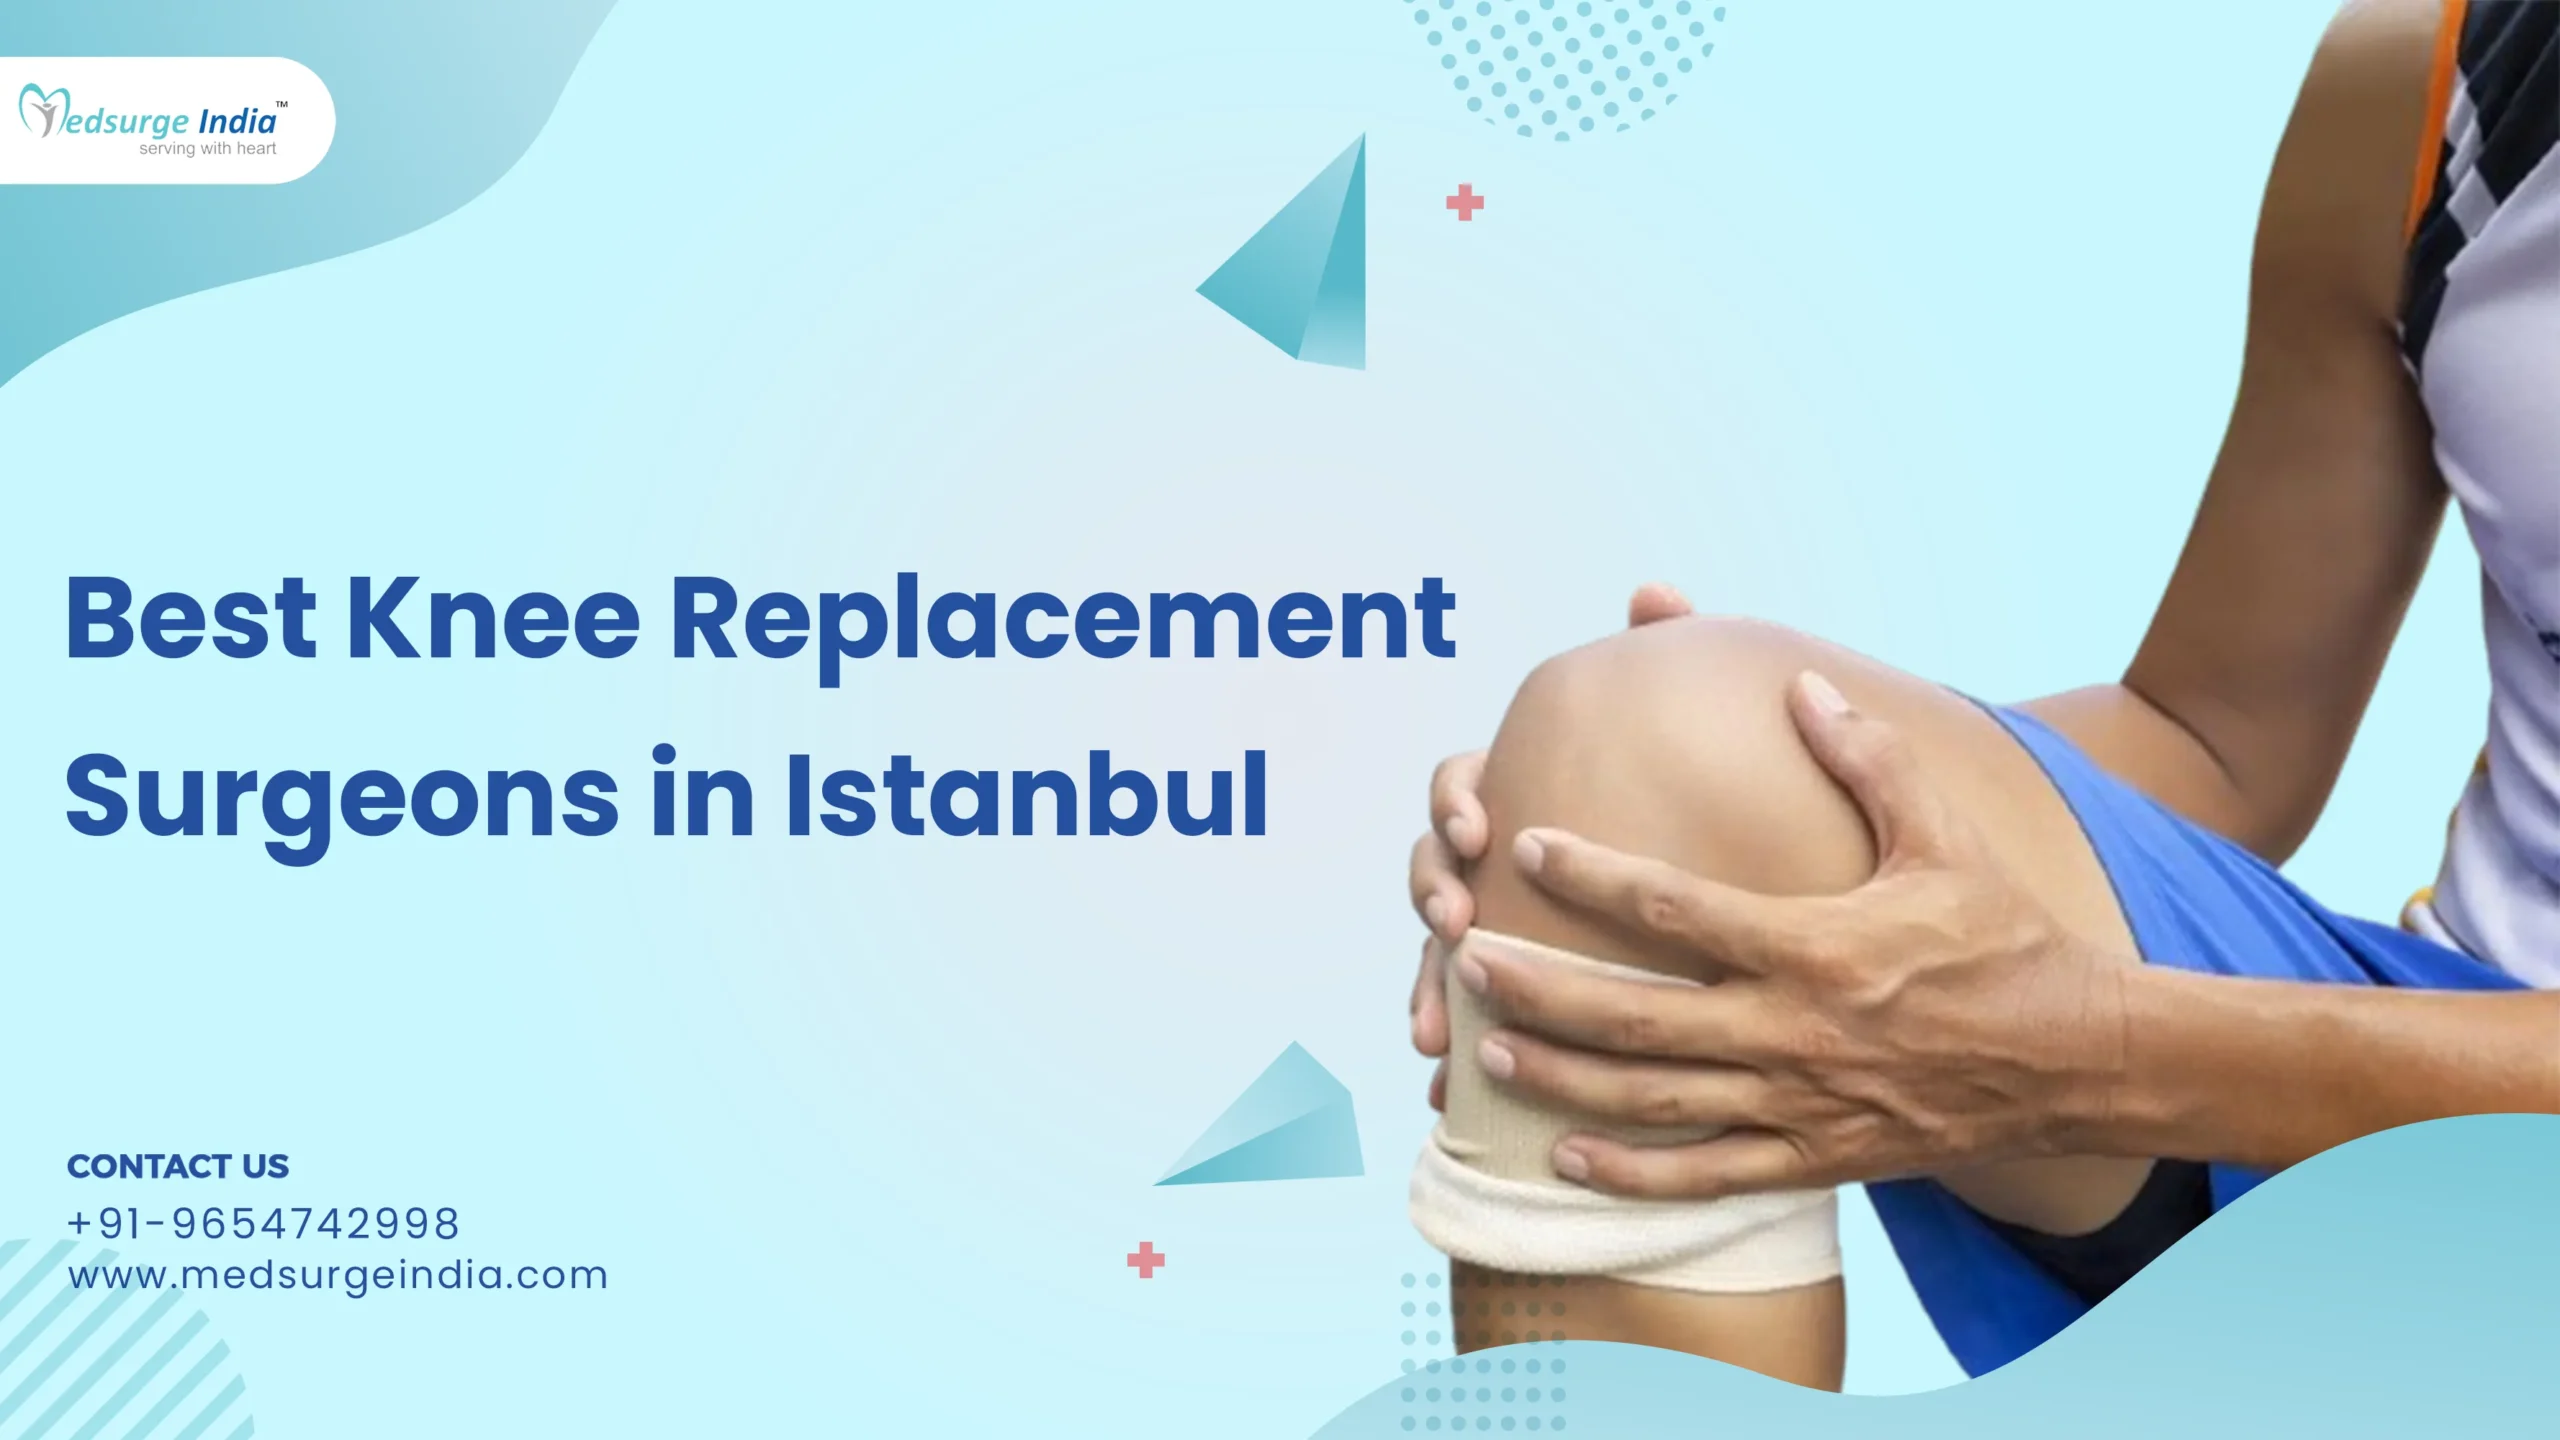 Best Knee Replacement Surgeons in Istanbul